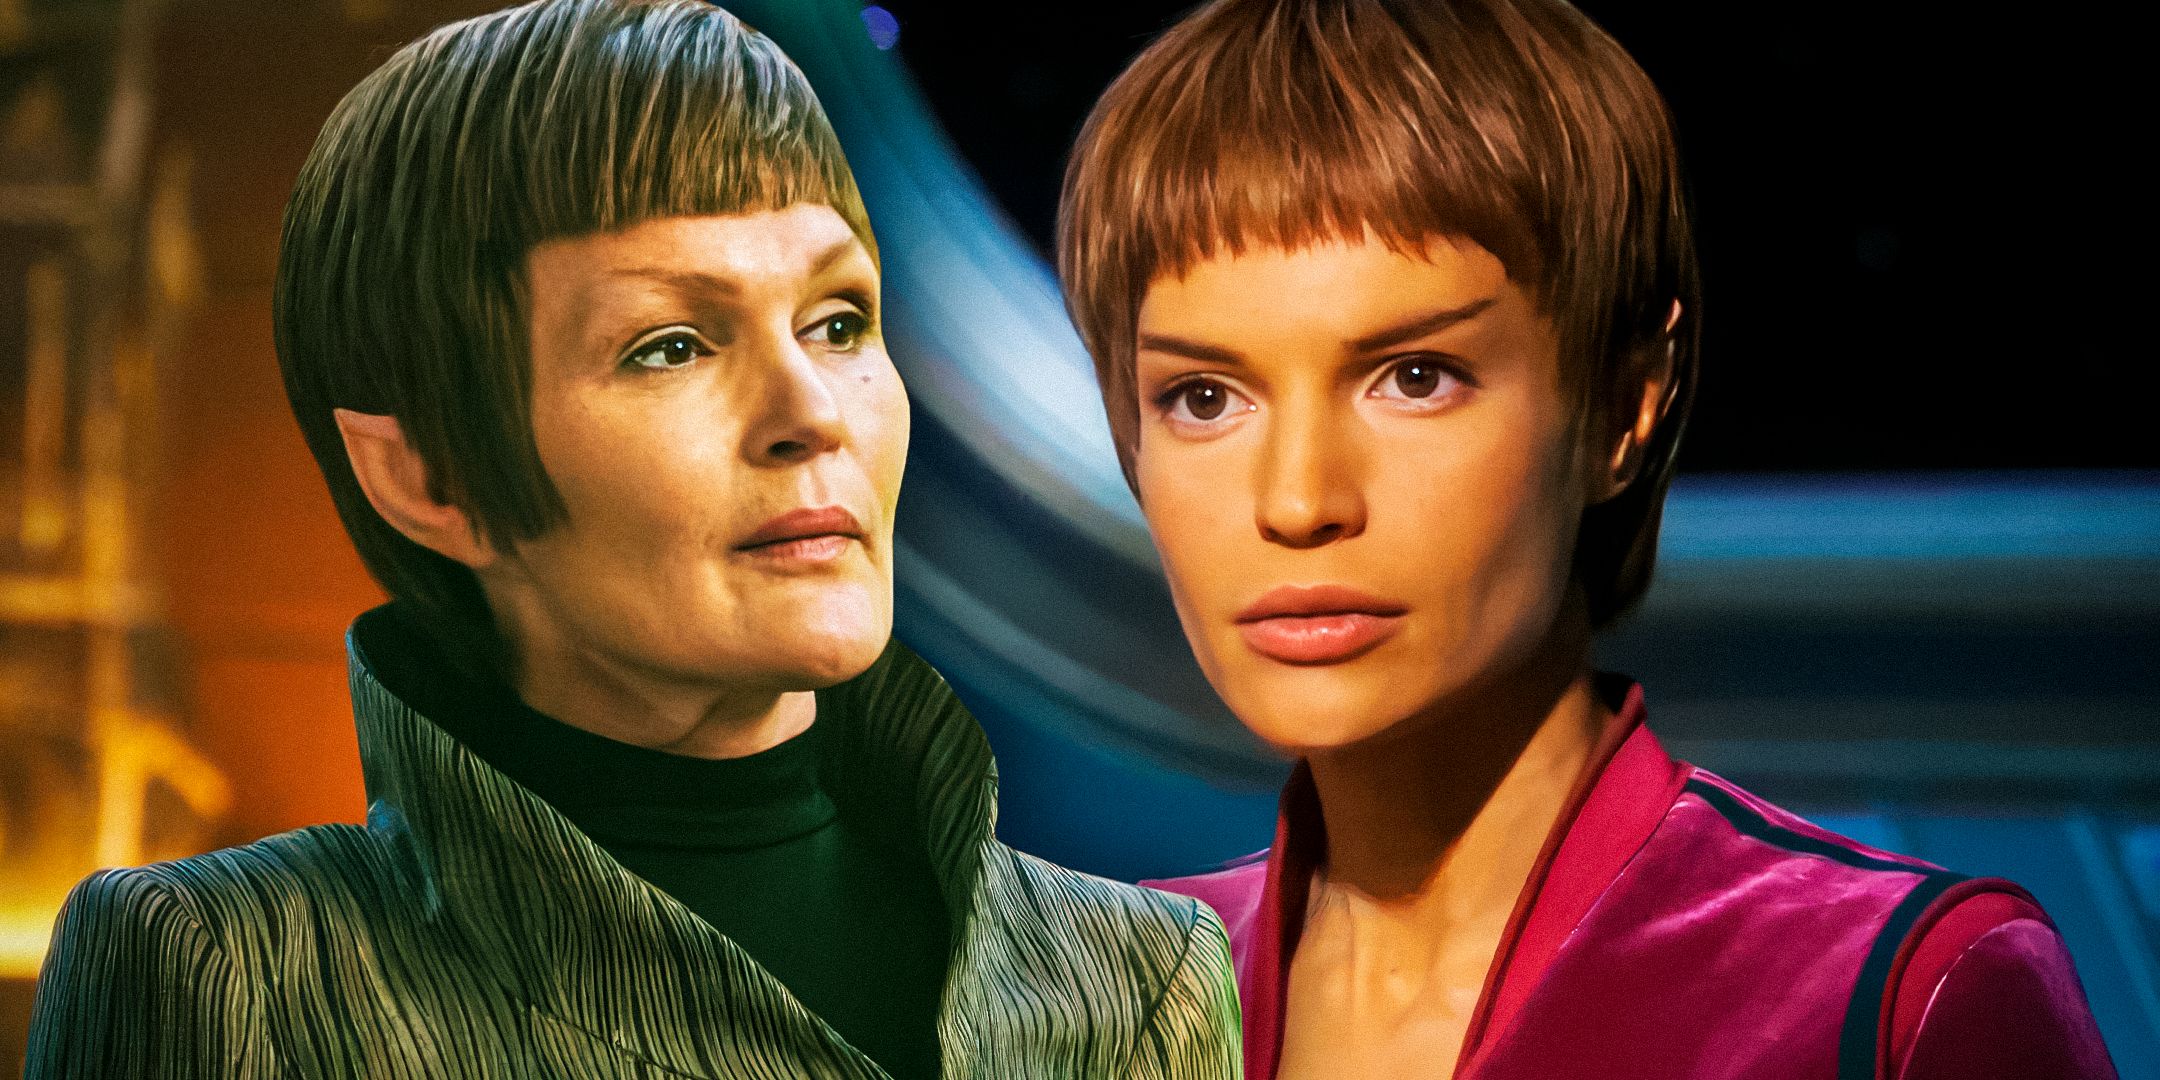 President T'Rina from Star Trek: Discovery and T'Pol from Enterprise